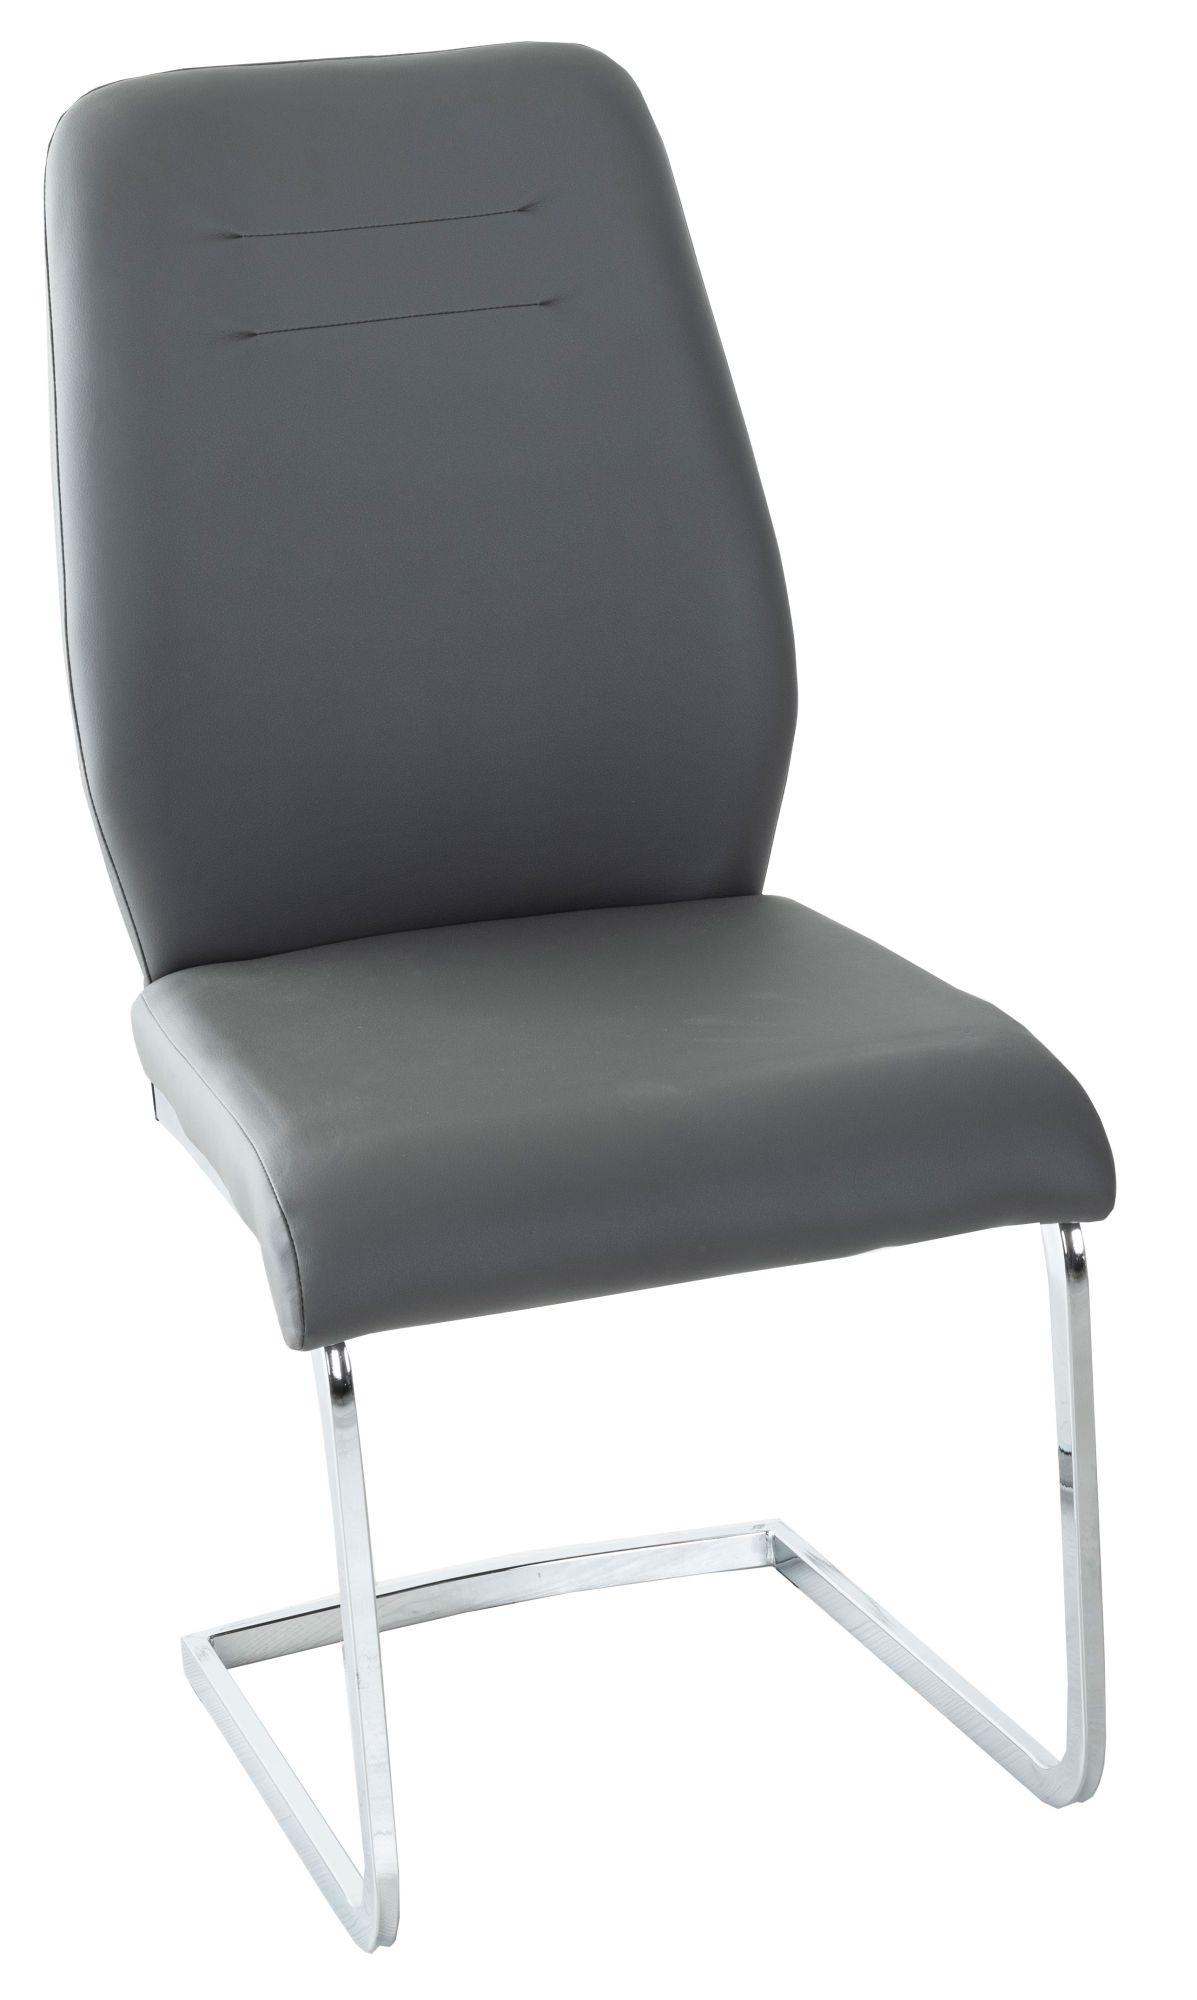 Oslo Dark Grey Leather Dining Chair with Brushed Stainless Steel Cantiliver Base